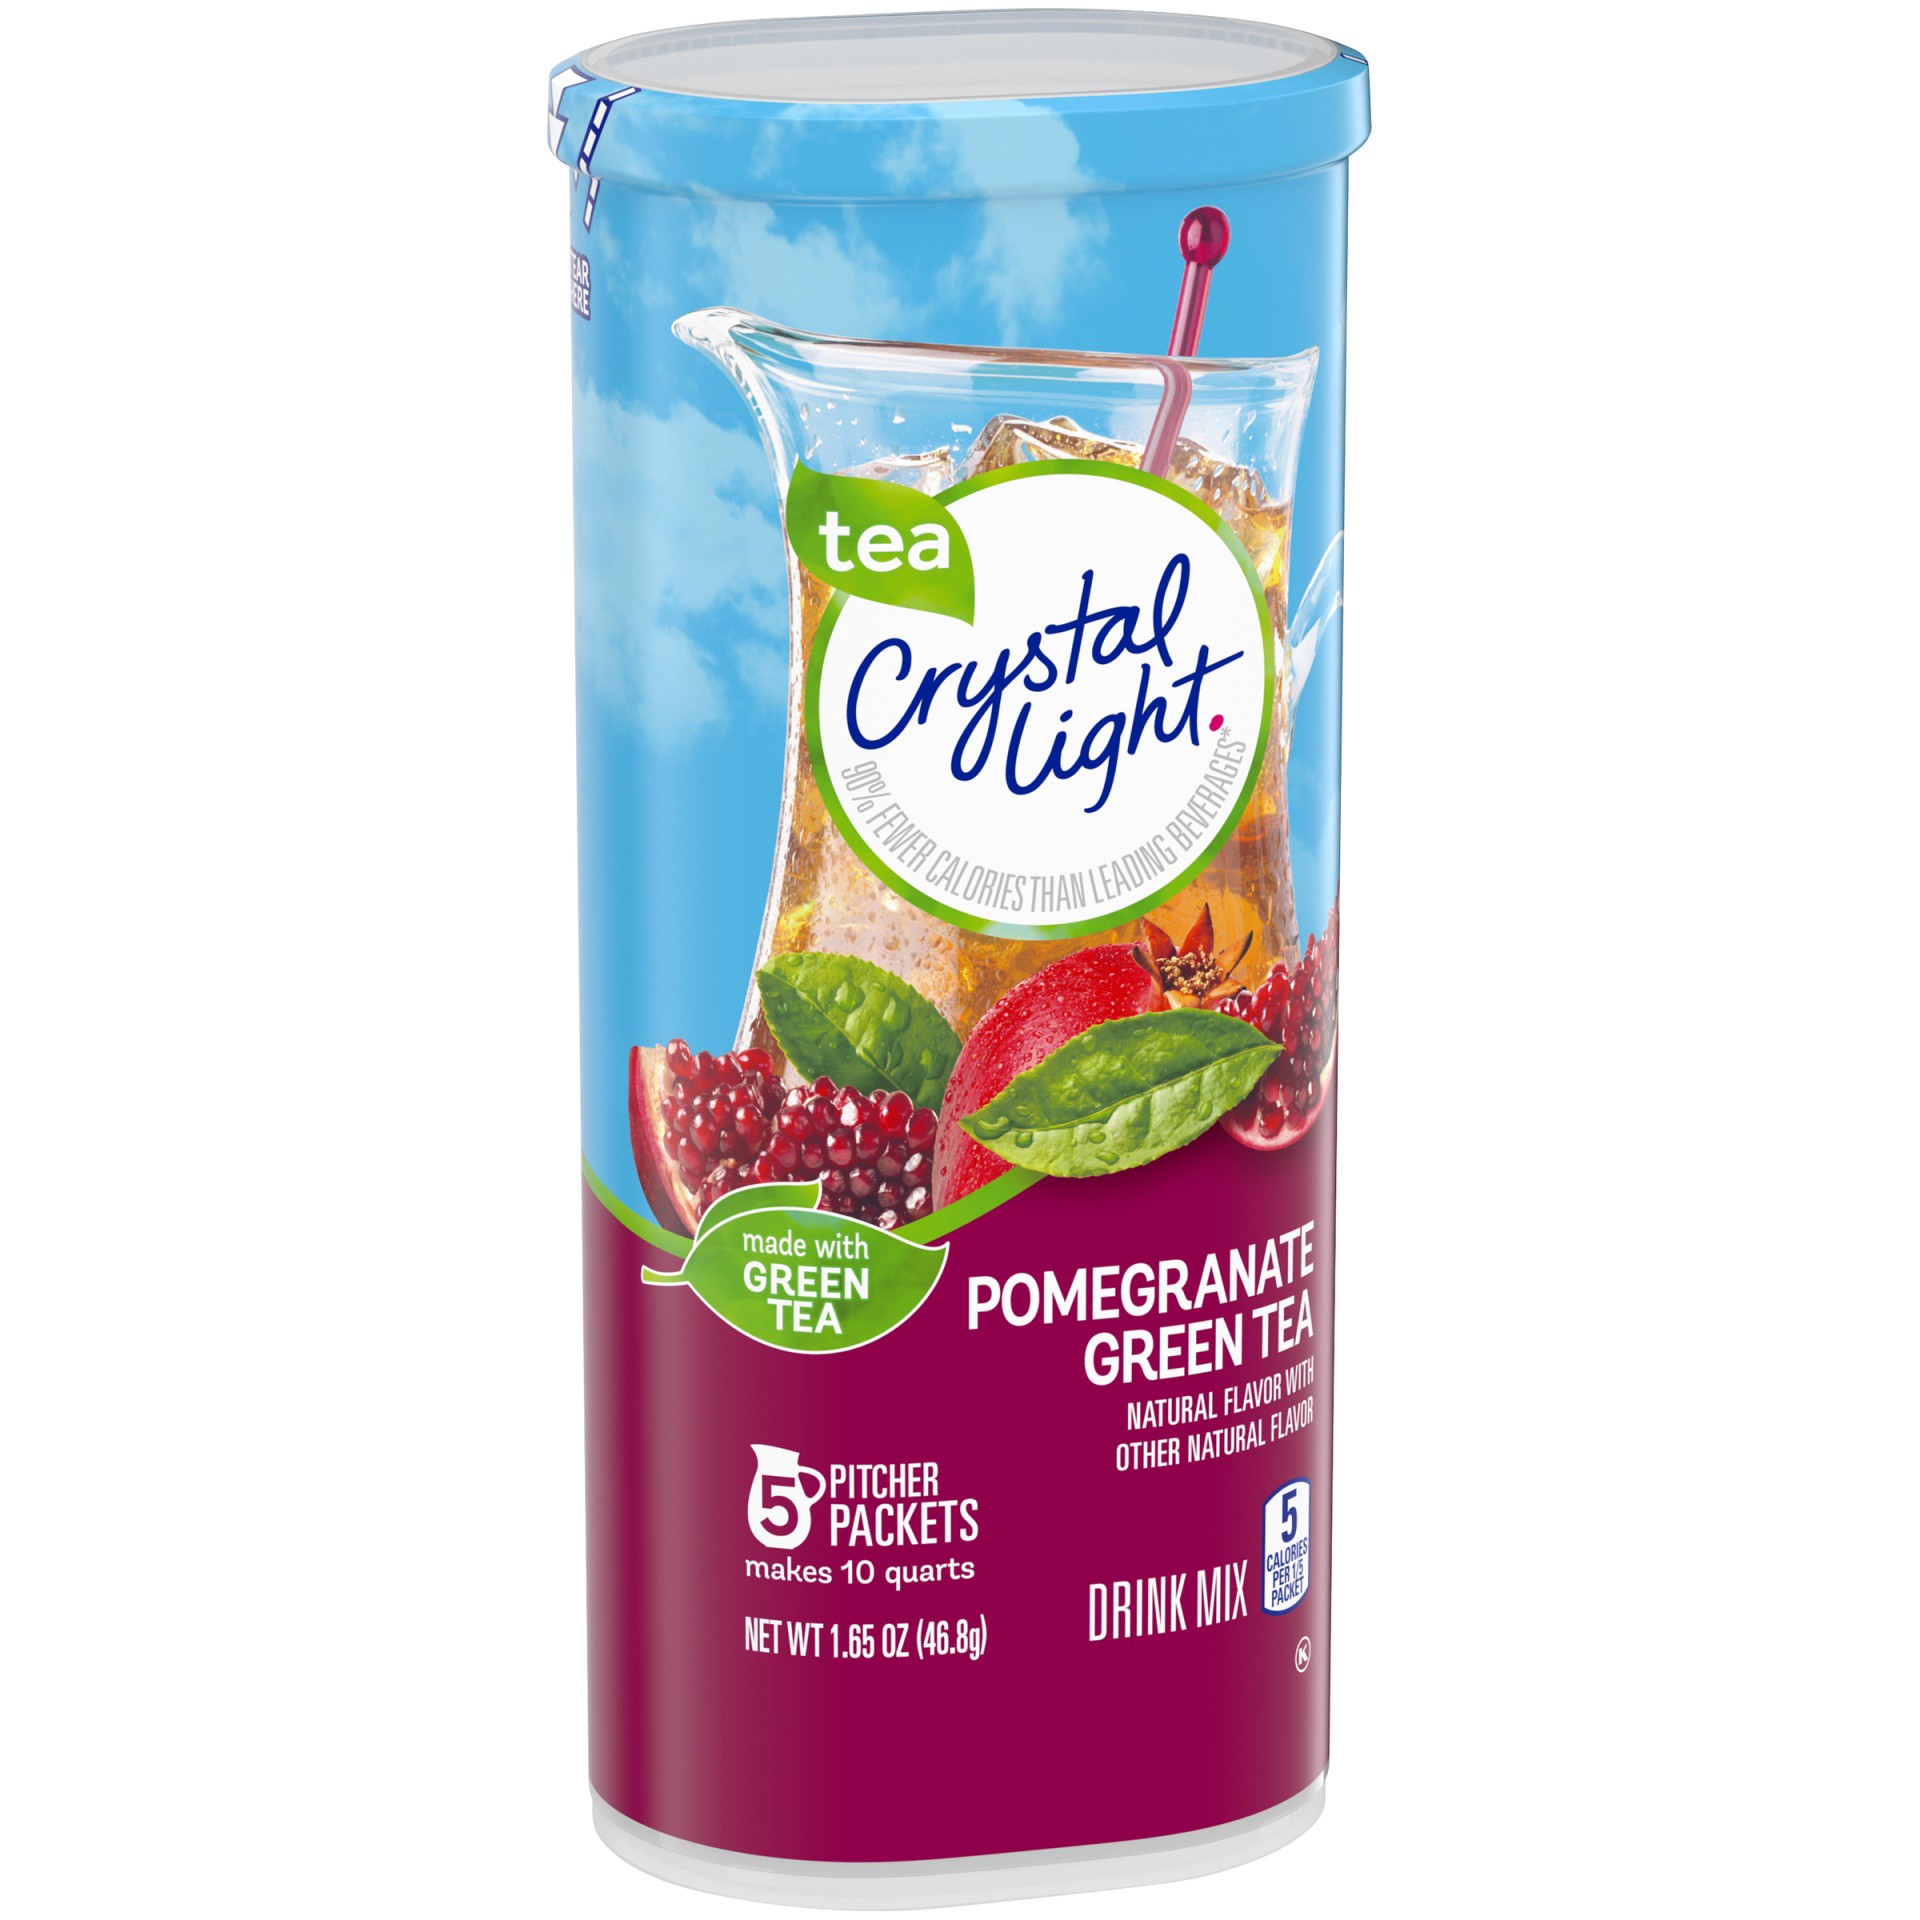 slide 2 of 14, Crystal Light Pomegranate Green Tea Naturally Flavored Powdered Drink Mix, 5 ct Pitcher Packets, 5 ct